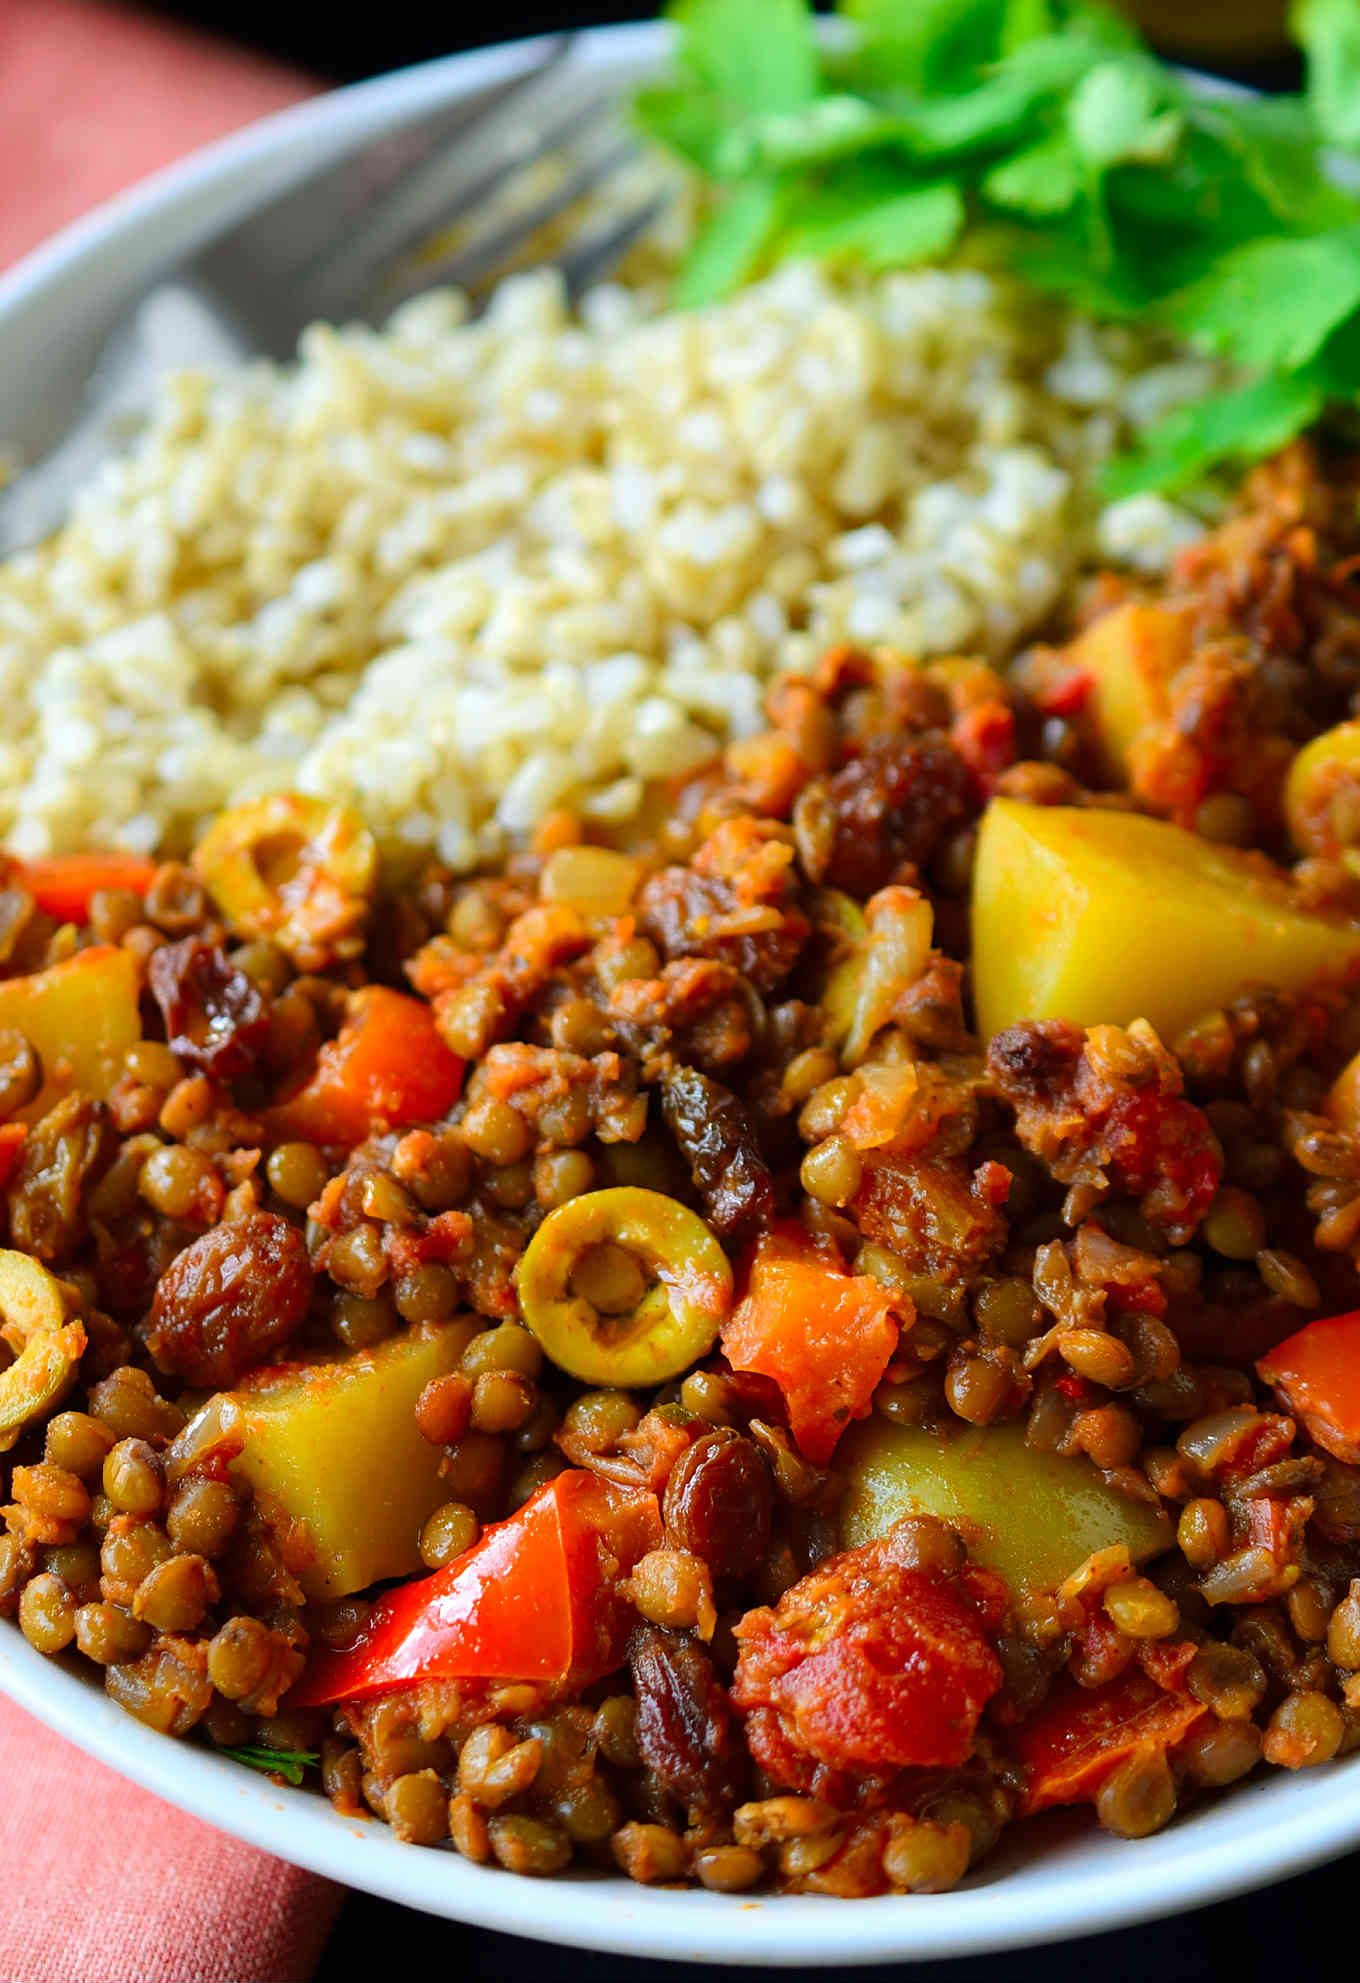 This vegan picadillo recipe is a delicious and colourful Cuban-style dish of spiced lentils, potatoes, tomatoes, olives and raisins. Served with rice, it’s quick and easy to prepare for a weeknight dinner and the warming spices of cinnamon, cumin, cloves and nutmeg make it a comforting and hearty meal for chilly weather. 